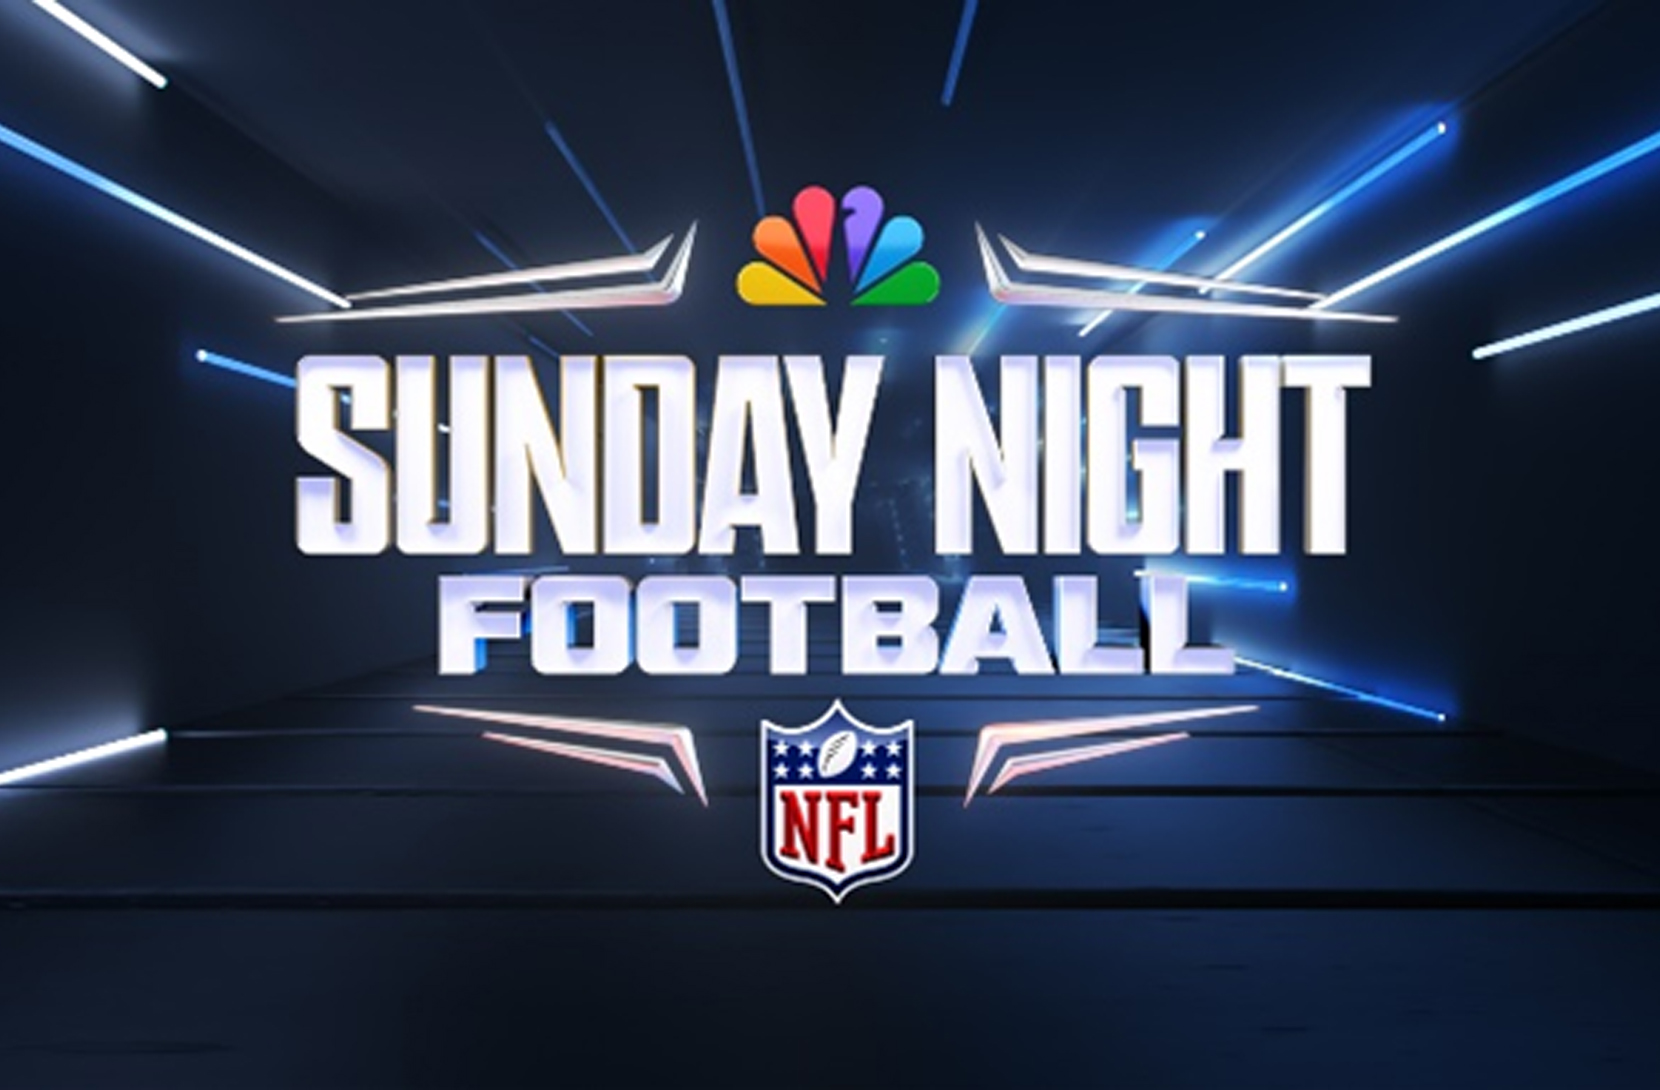 NBC to stream Thursday's NFL game - and all of Sunday Night